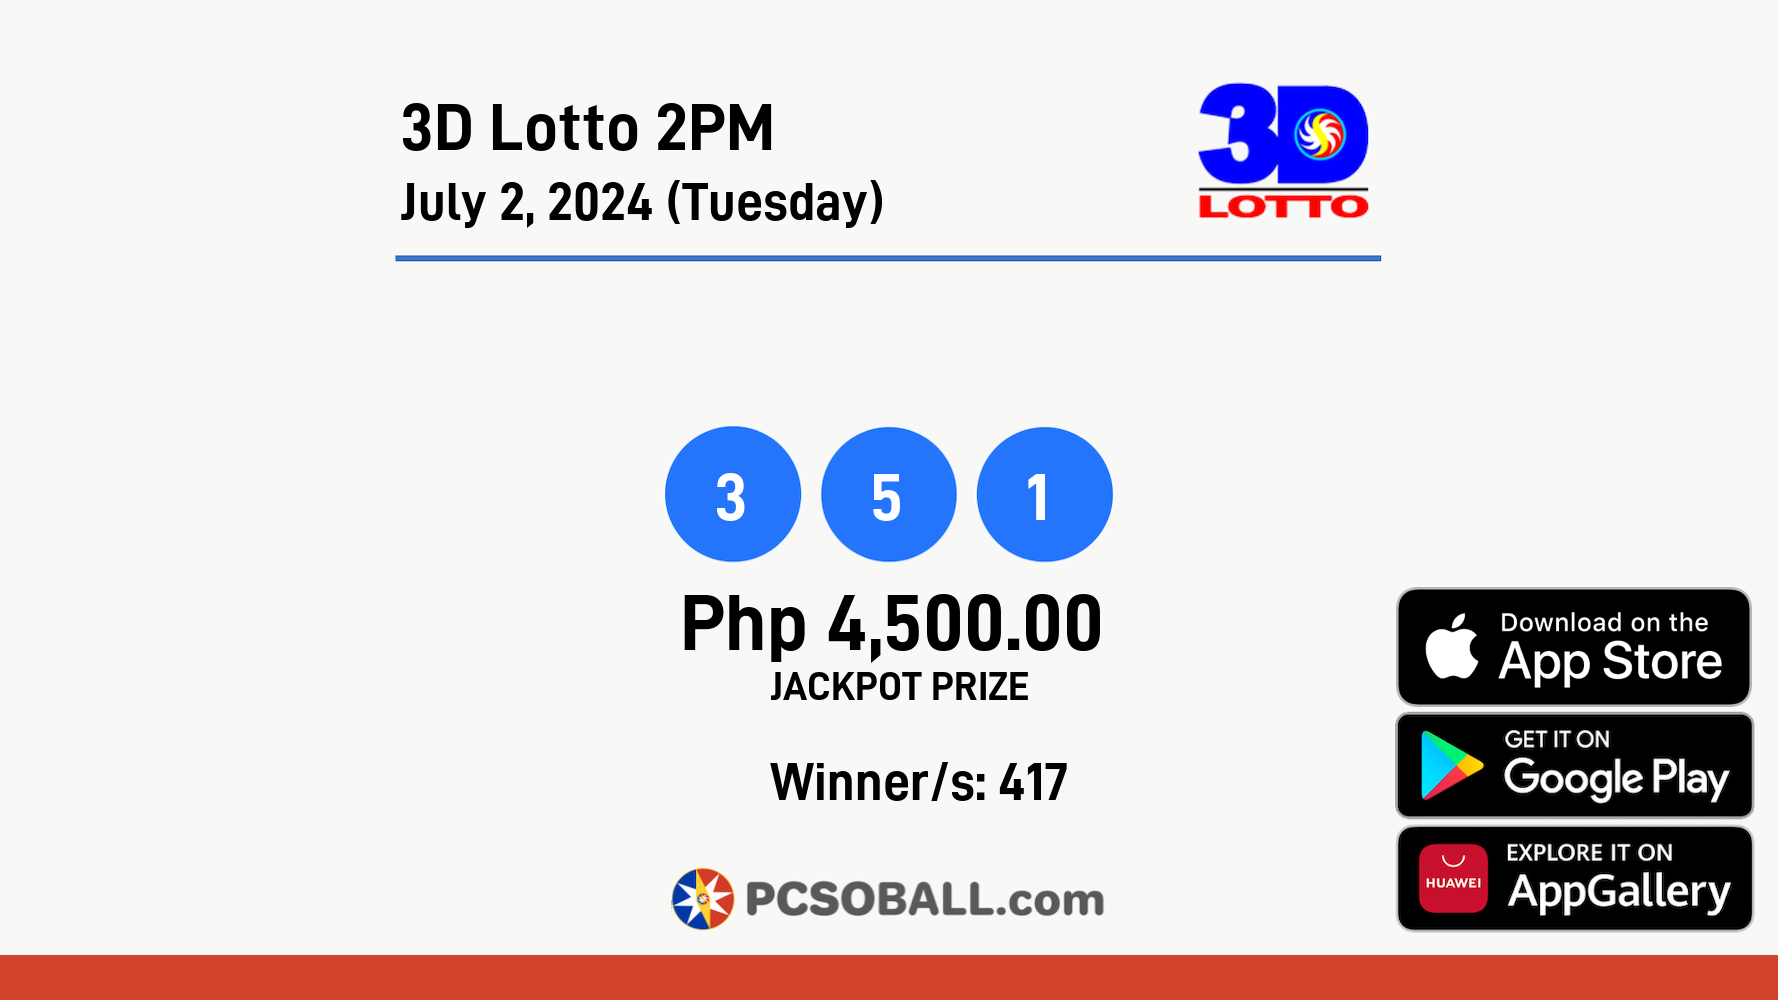 3D Lotto 2PM July 2, 2024 (Tuesday) Result